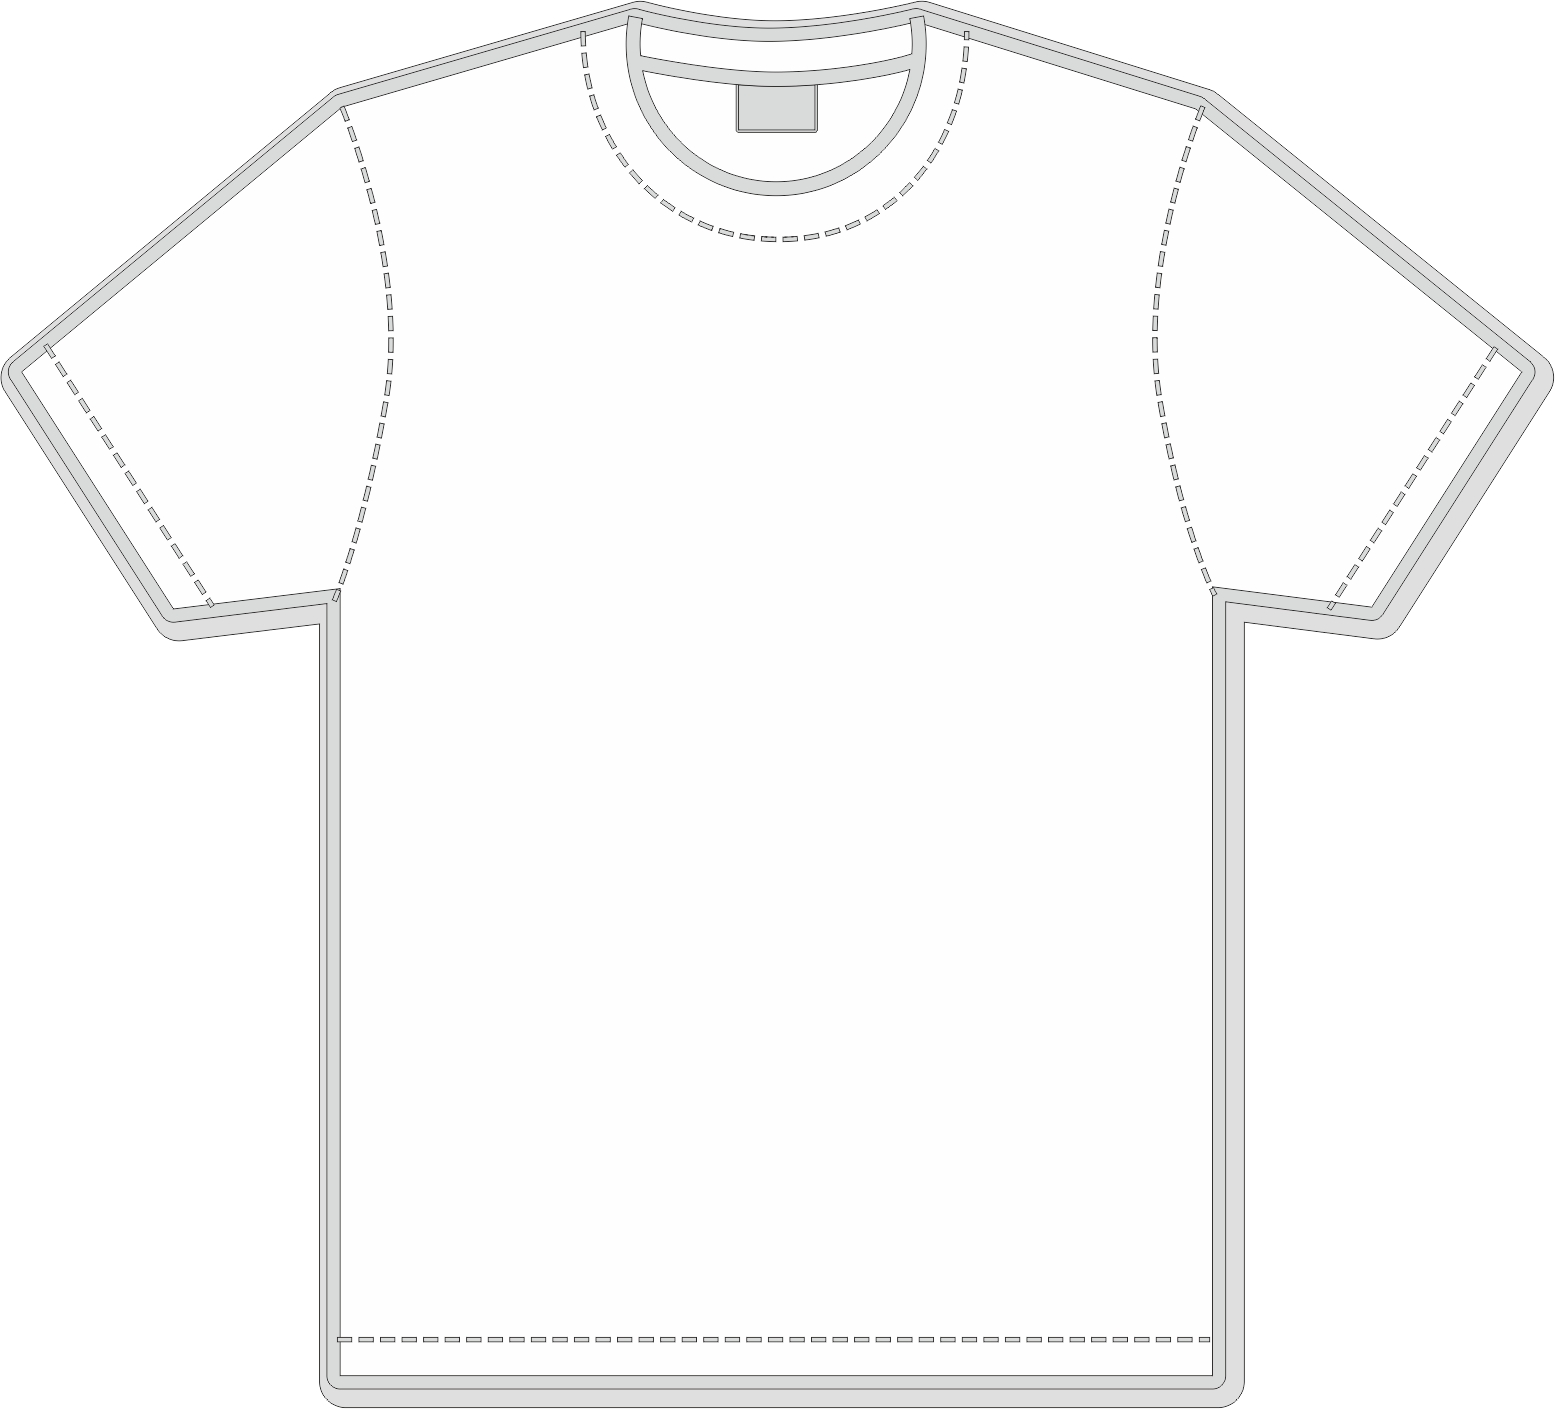 Christ Church CofE Primary School 100% White FT Cotton T Shirt with logo.